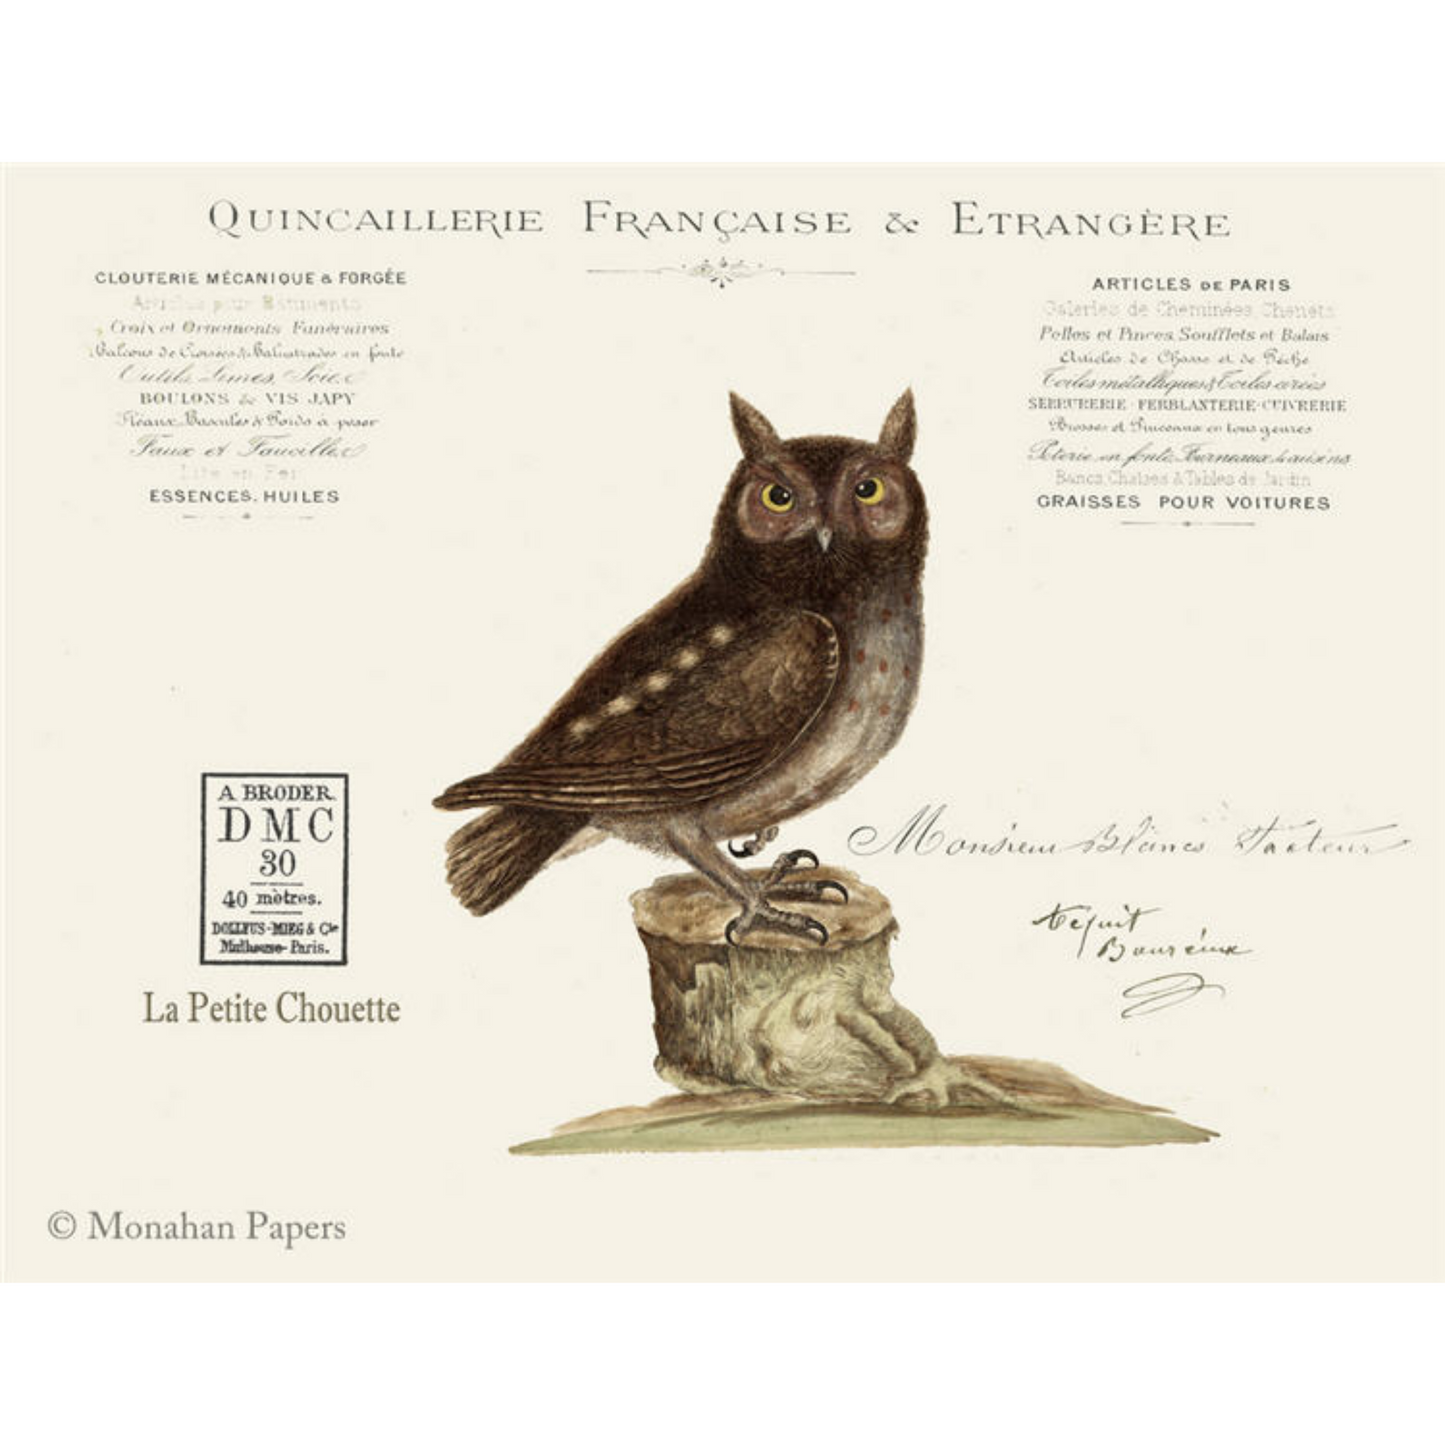 Francaise Owl Decoupage Paper by Monahan Papers available at Milton's Duaghter.  11" x 17".  Owl perched on tree stump in brown and sepia tones with French writing.